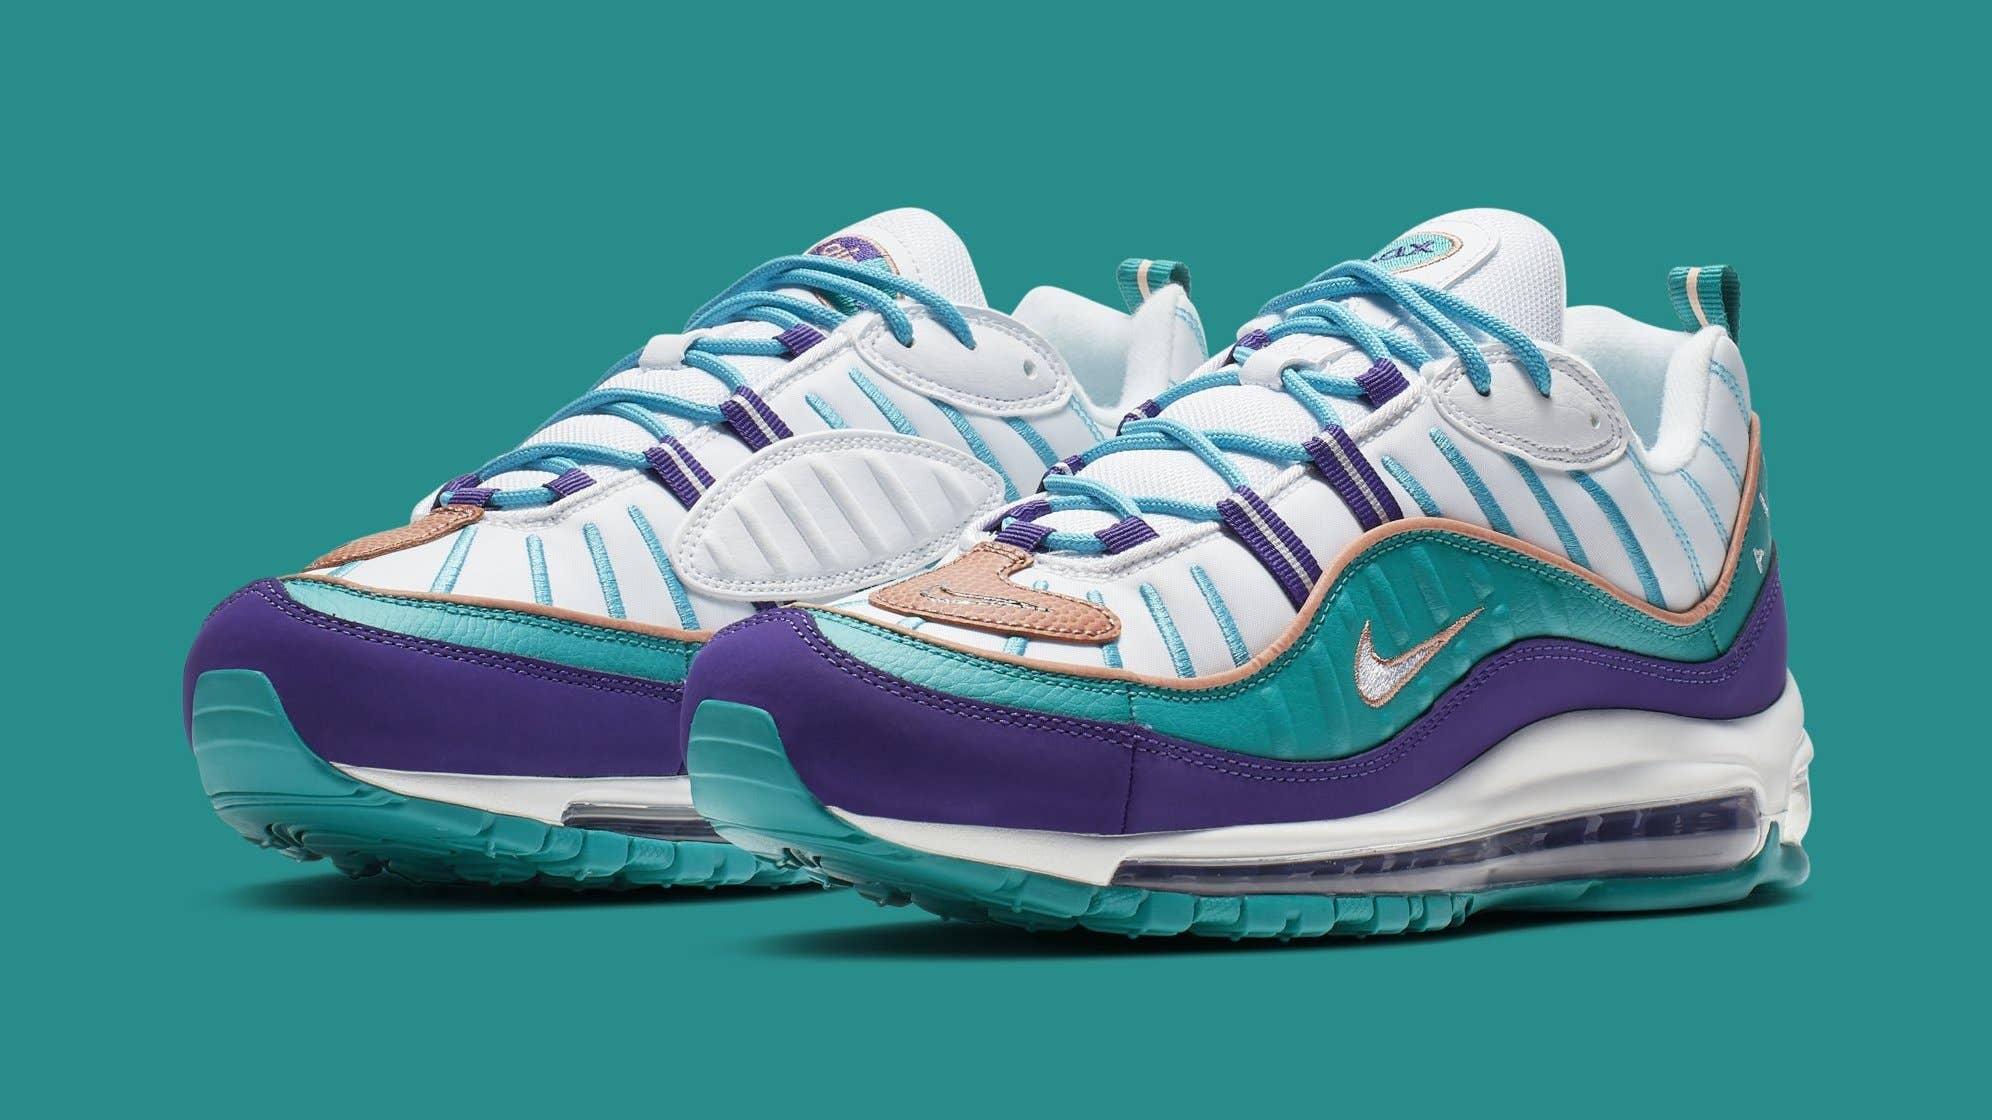 Charlotte Hornets Colors Cover This Max 98 Complex